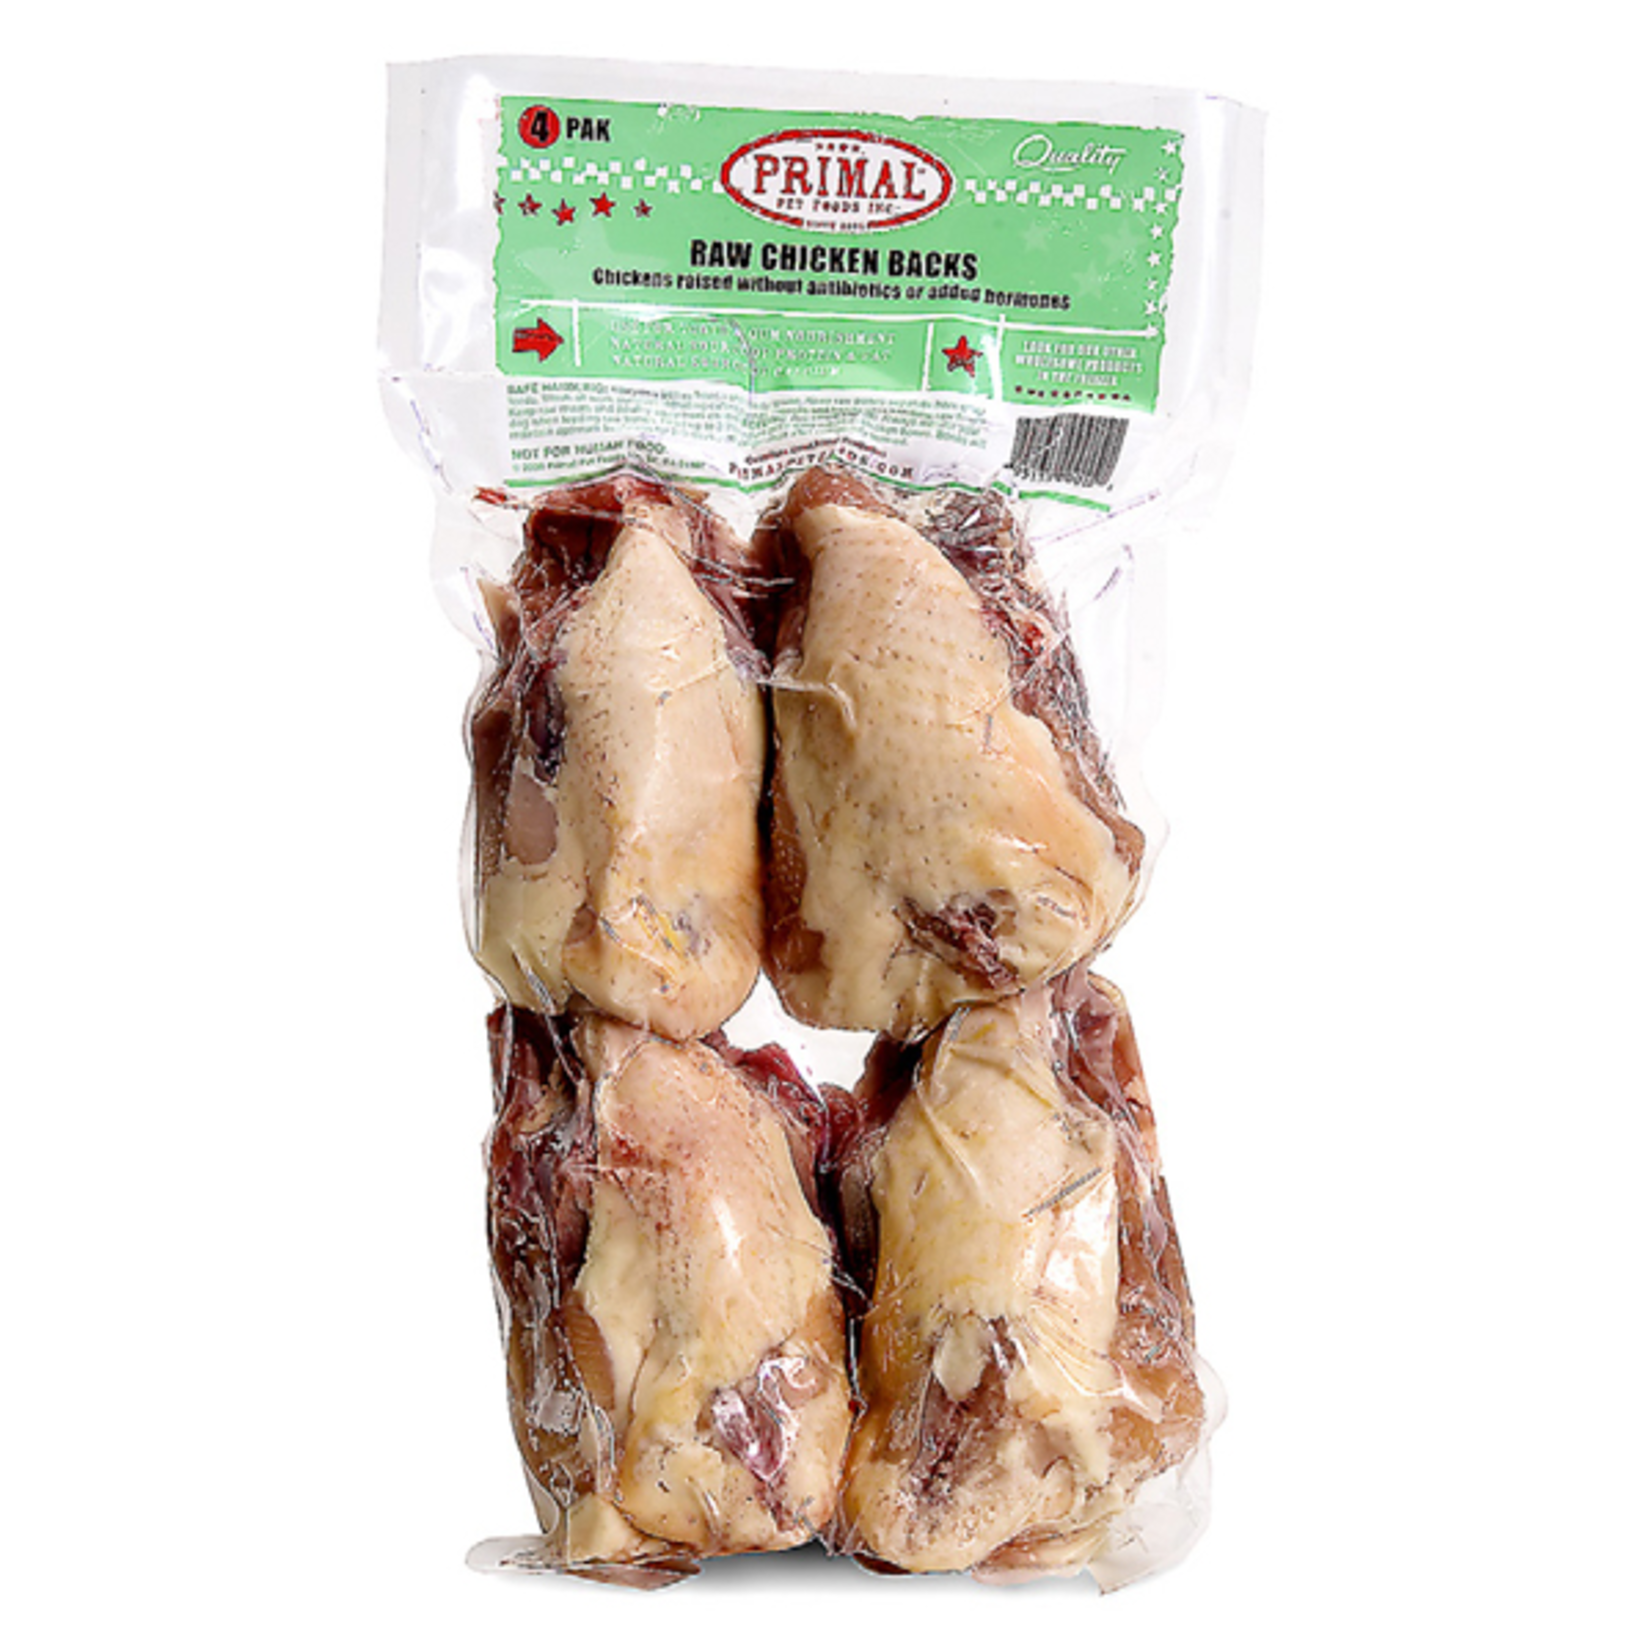 Primal Pet Foods Primal Dog and Cat Raw Meaty Chicken Backs 4 pk